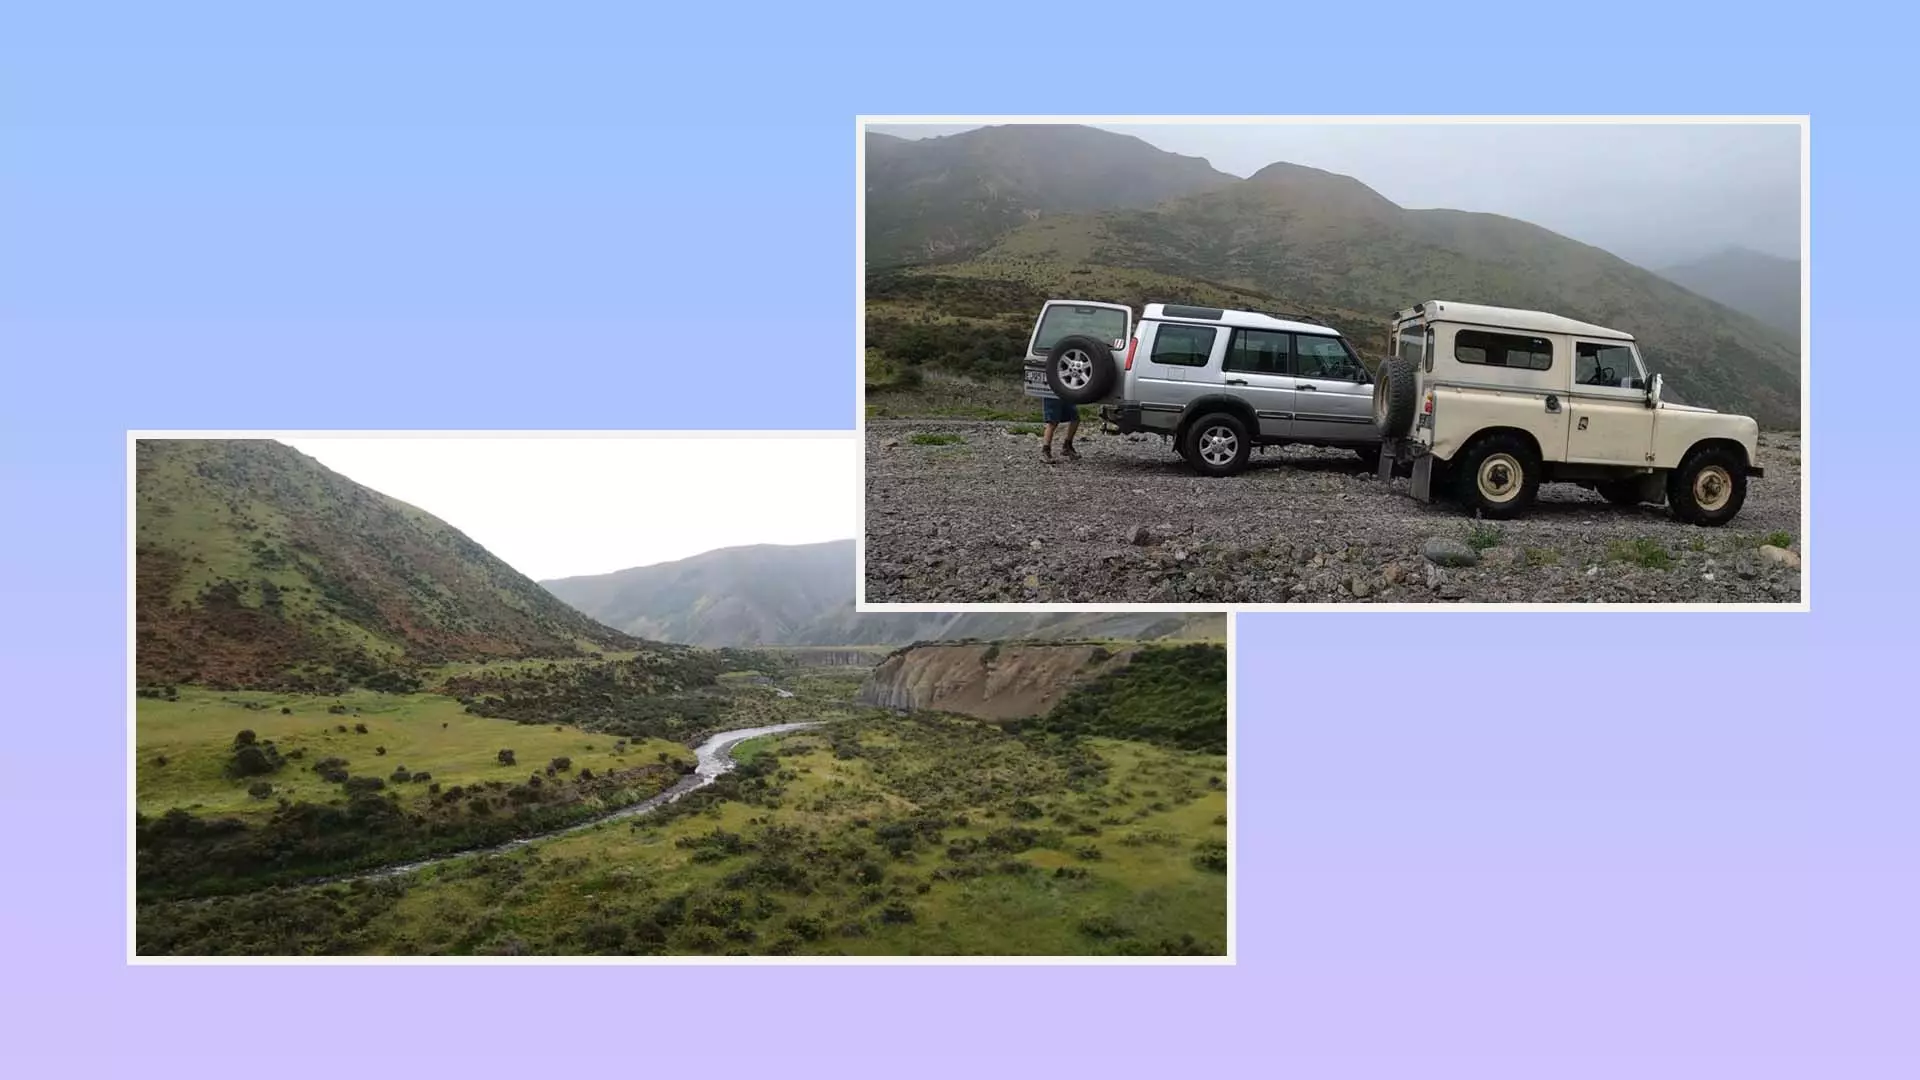 Get Your Fill of Vintage Land Rover Hijinks With This Kiwi&#8217;s Beautiful Channel